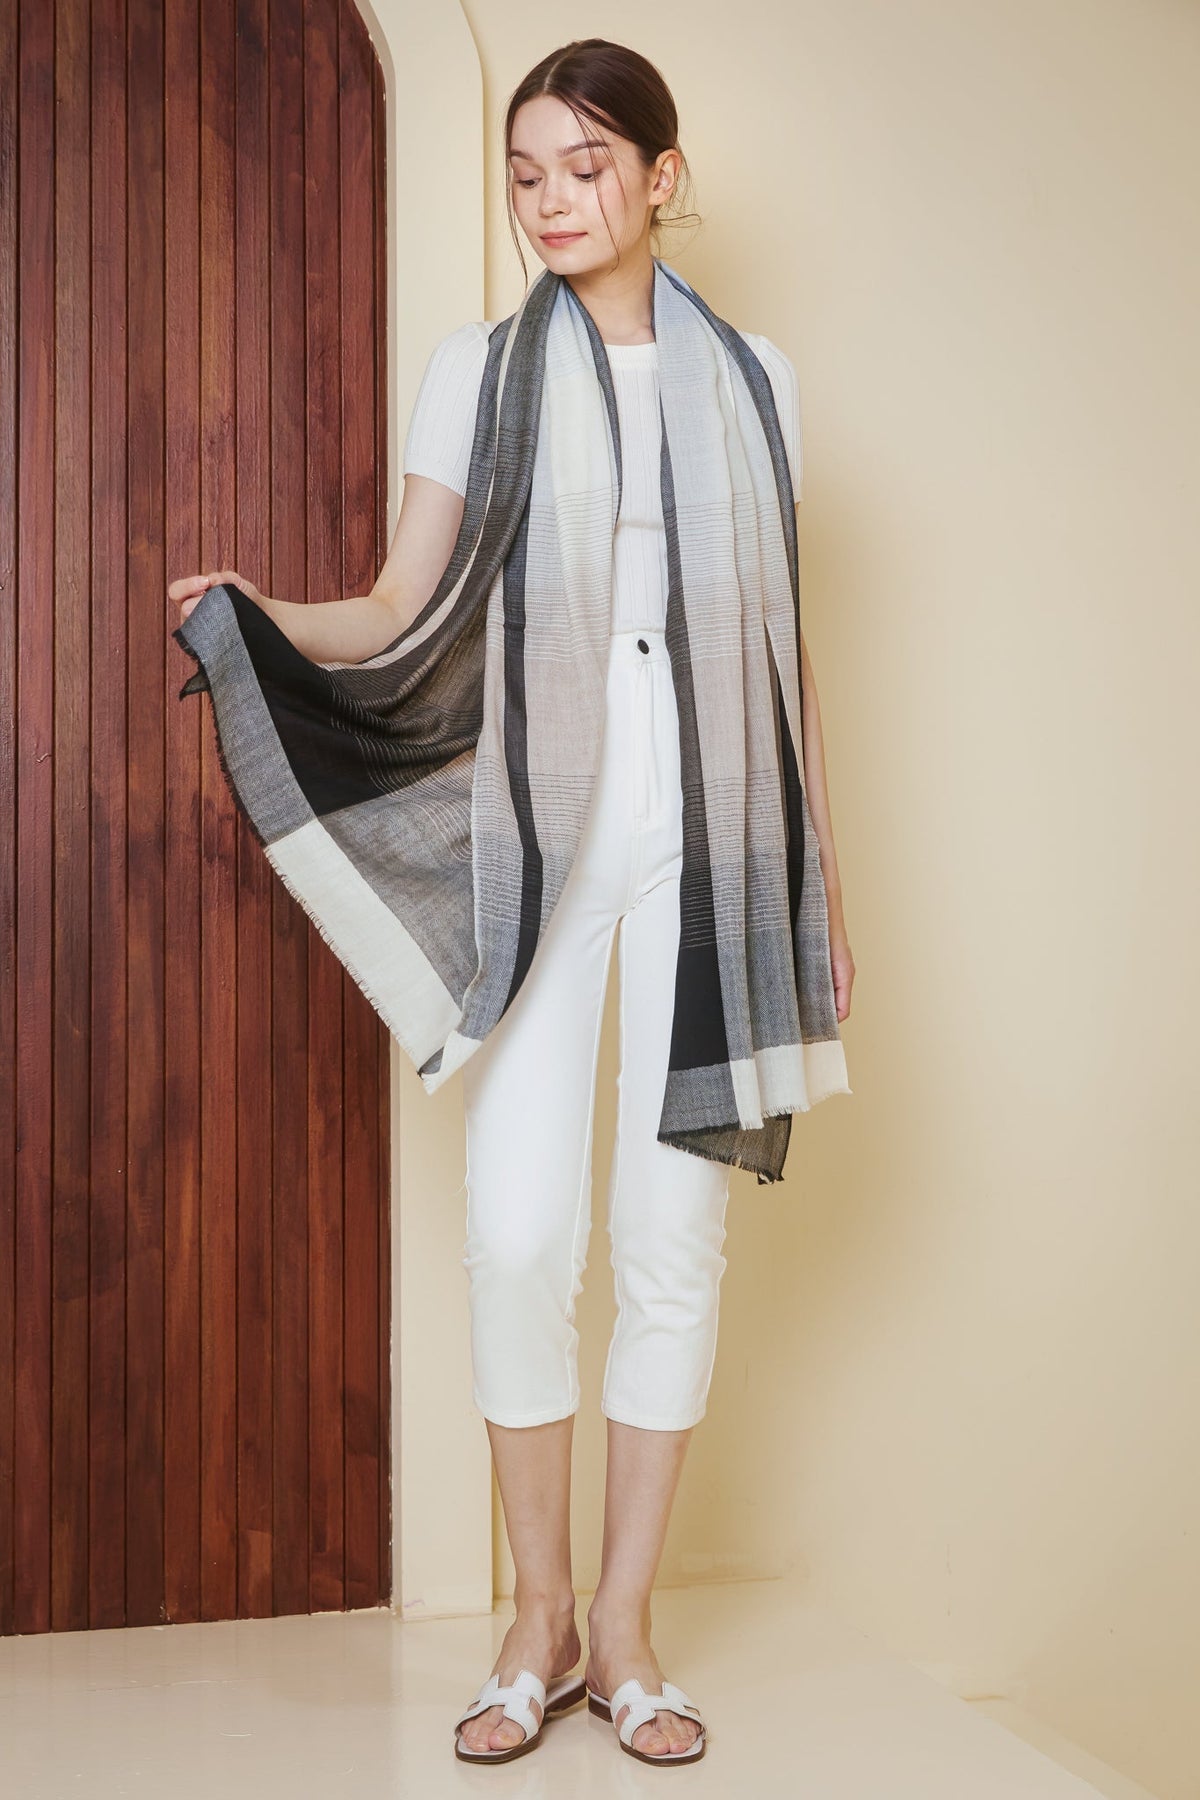 Backorder* Luxe Cashmere Shawl in Gradient Blue Grey